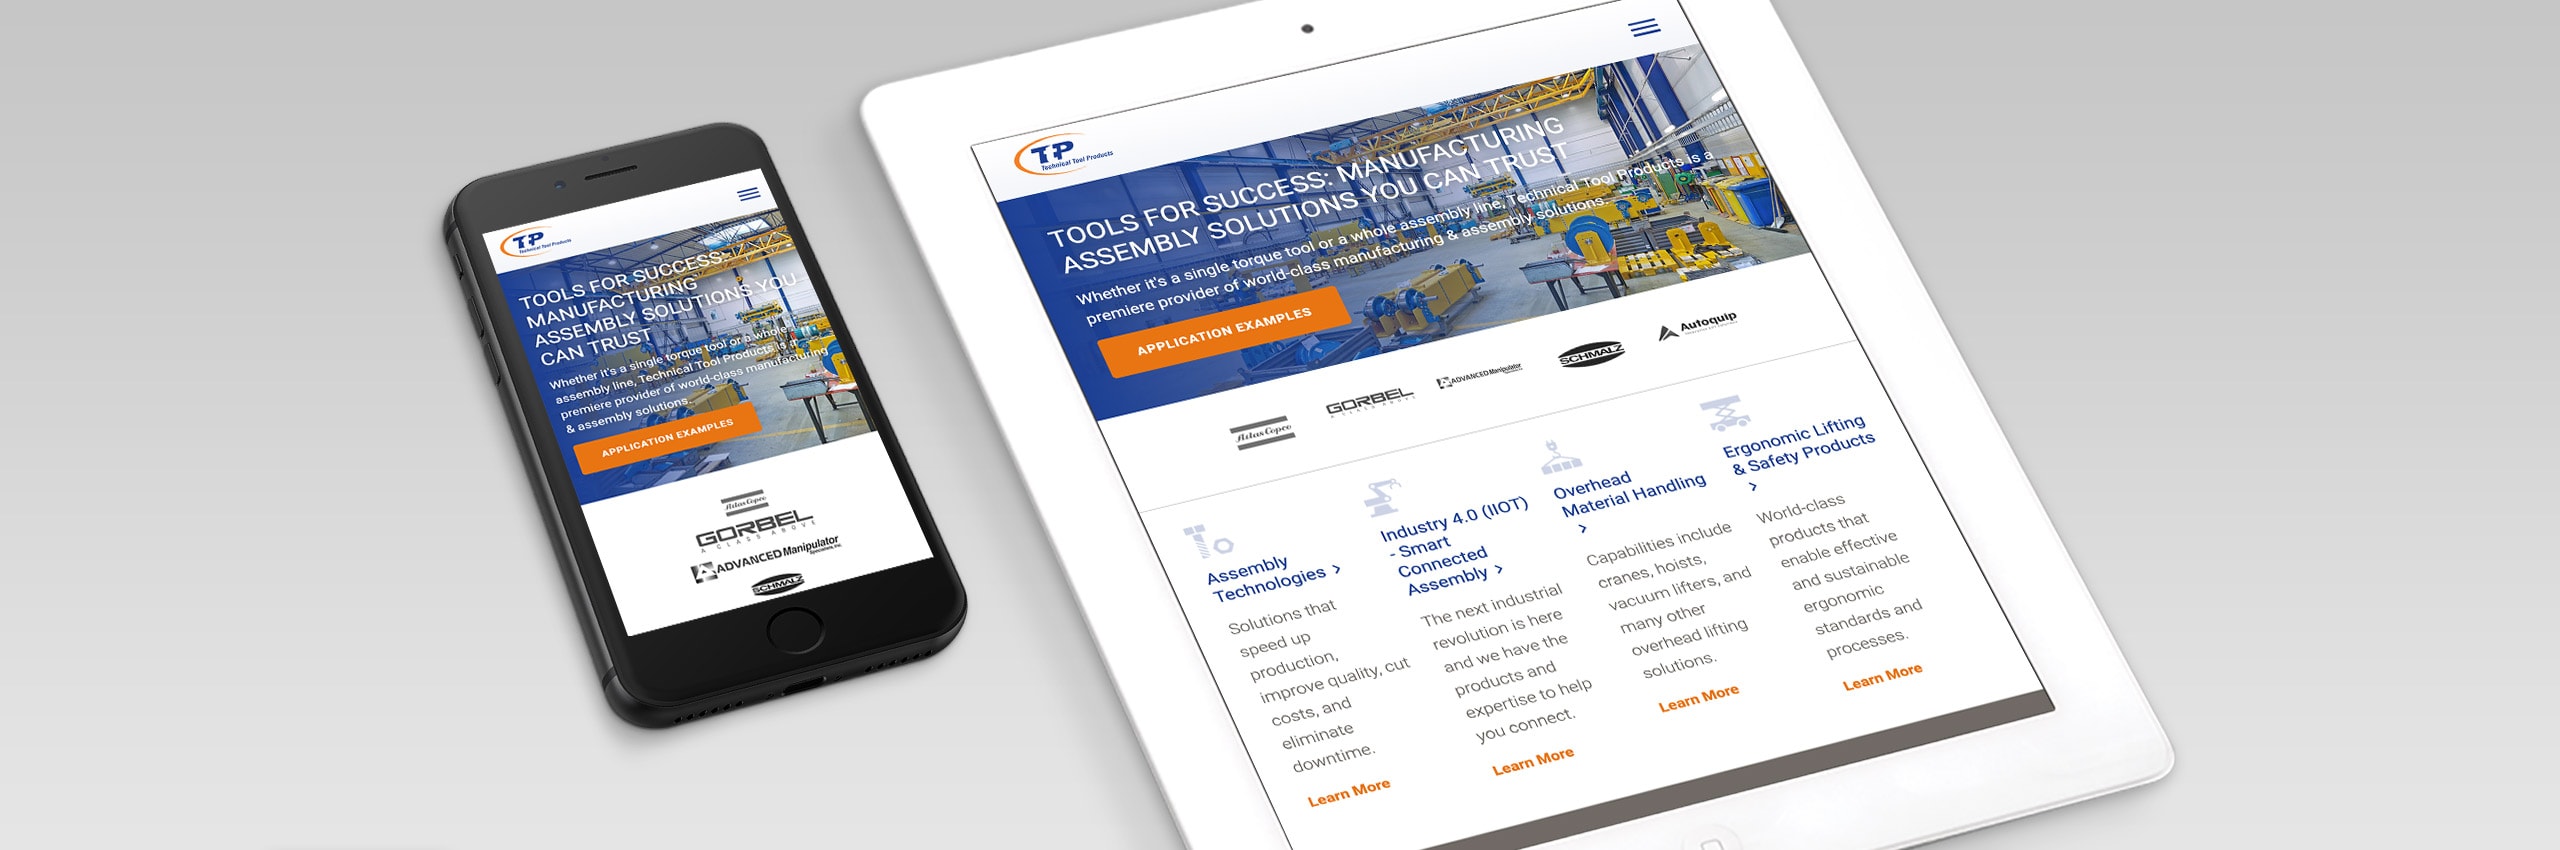 Industrial Manufacturing Web Design Technical Tool Case Study Archive